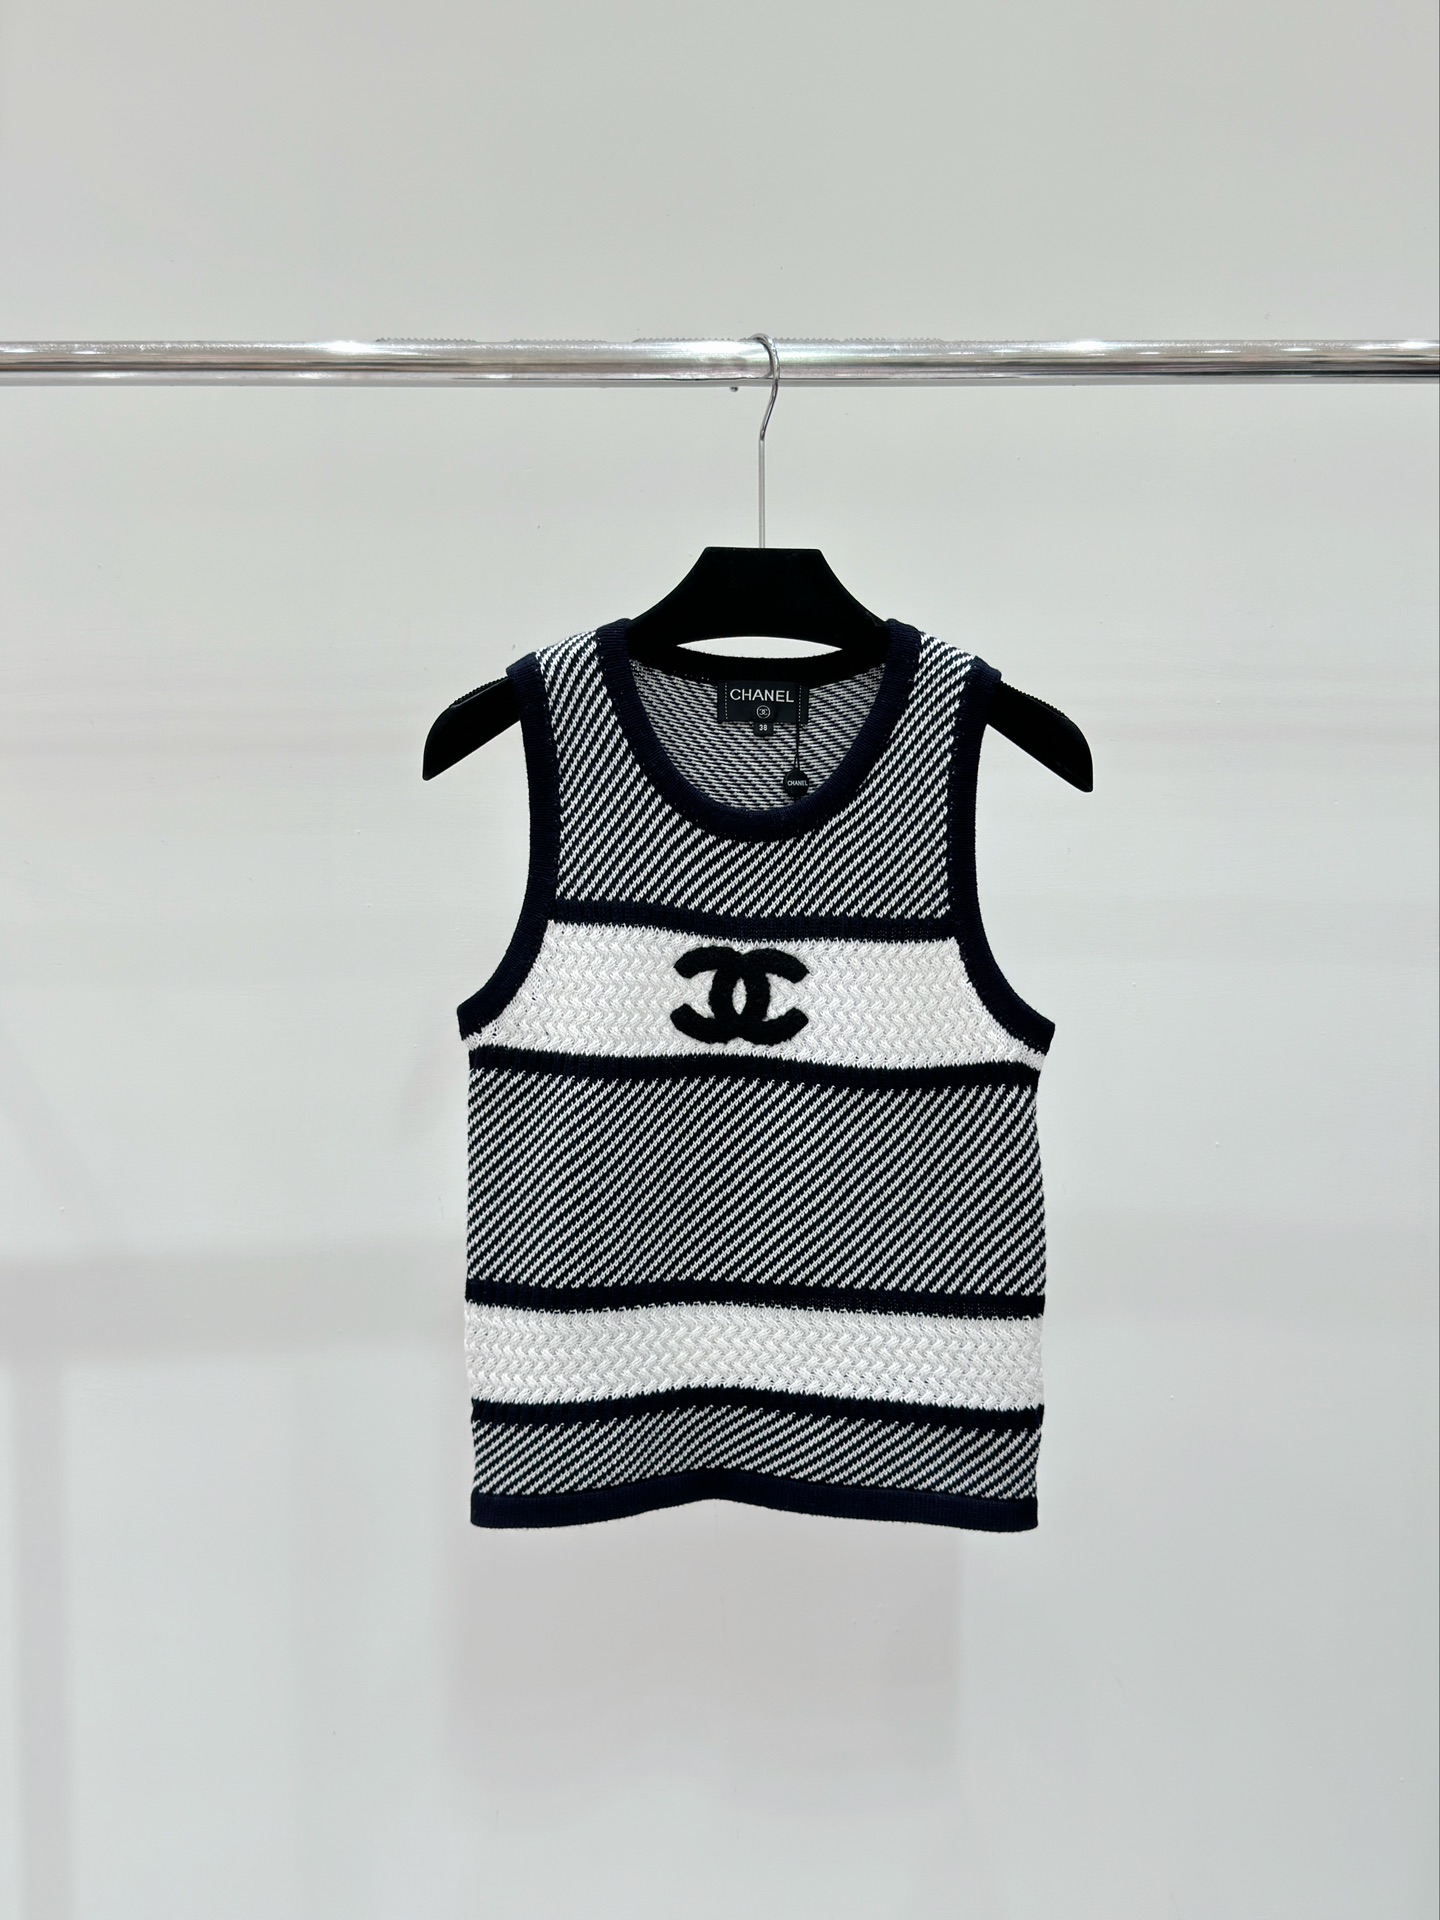 Chanel Clothing Tank Tops&Camis Embroidery Knitting Spring/Summer Collection